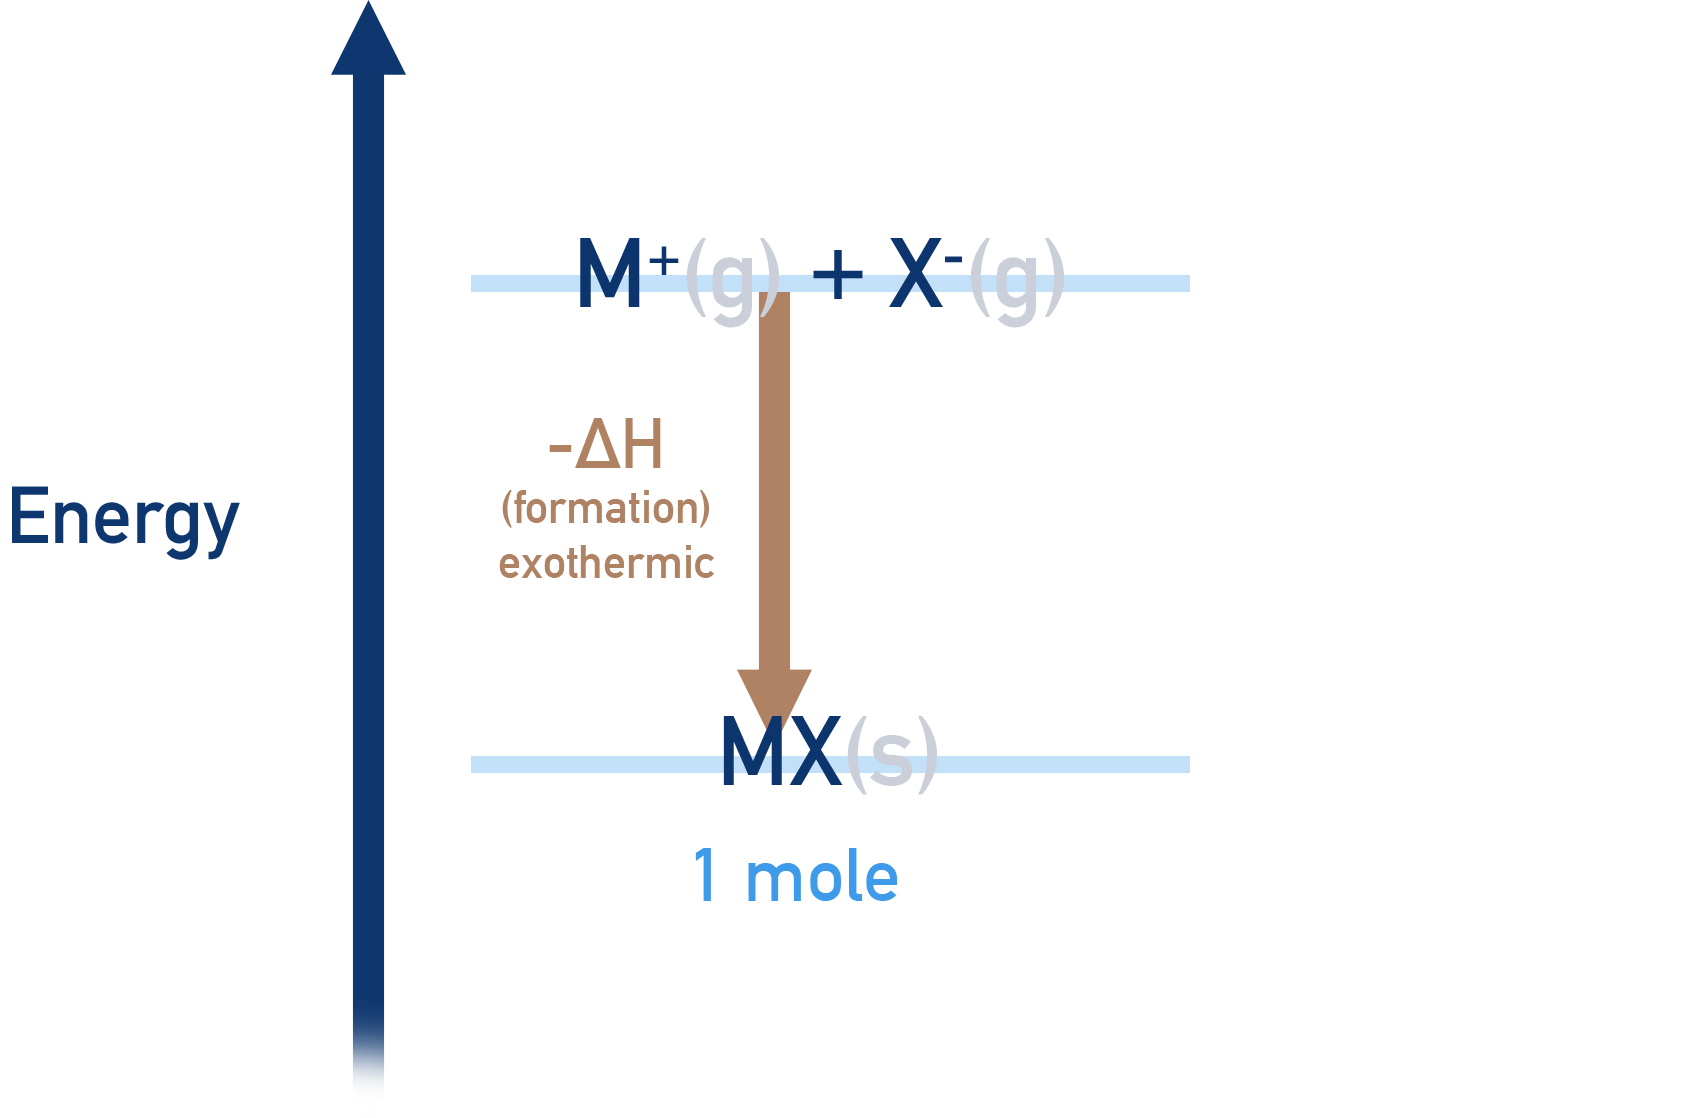 lattice enthalpy of formation exothermic a-level chemistry